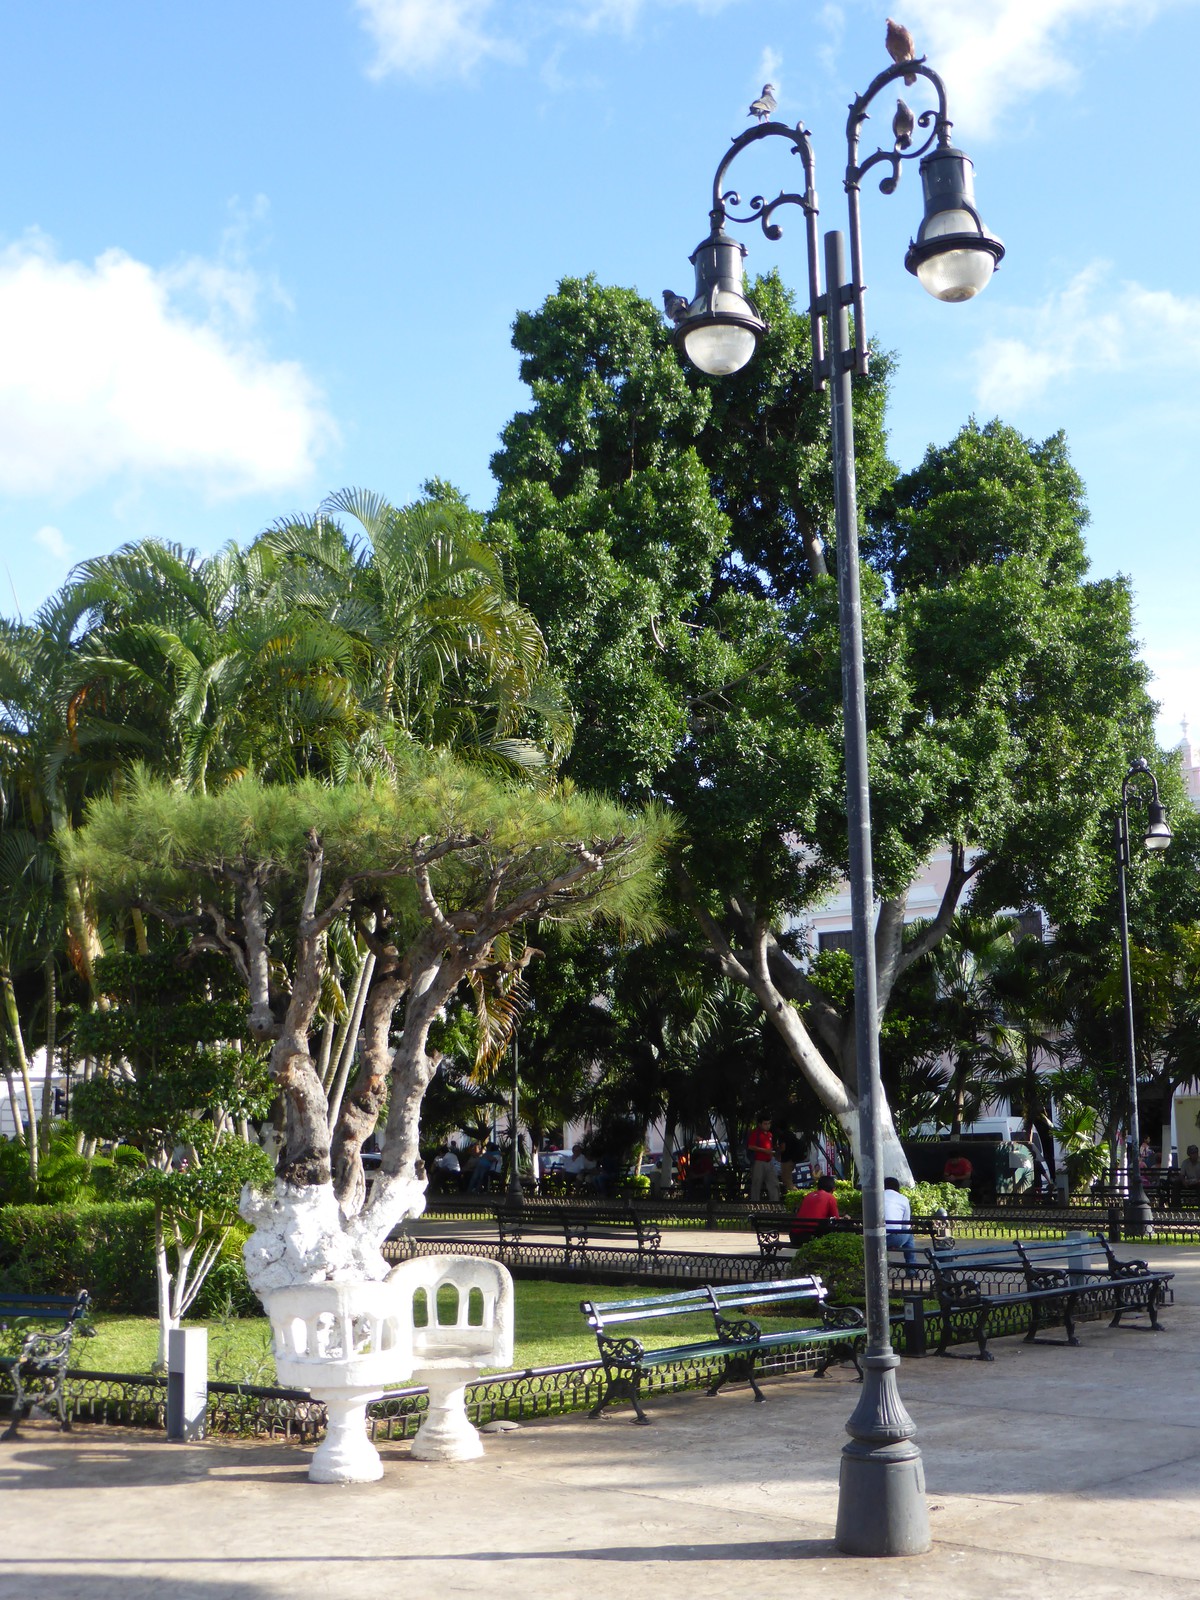 The pretty park in the middle of Plaza Grande